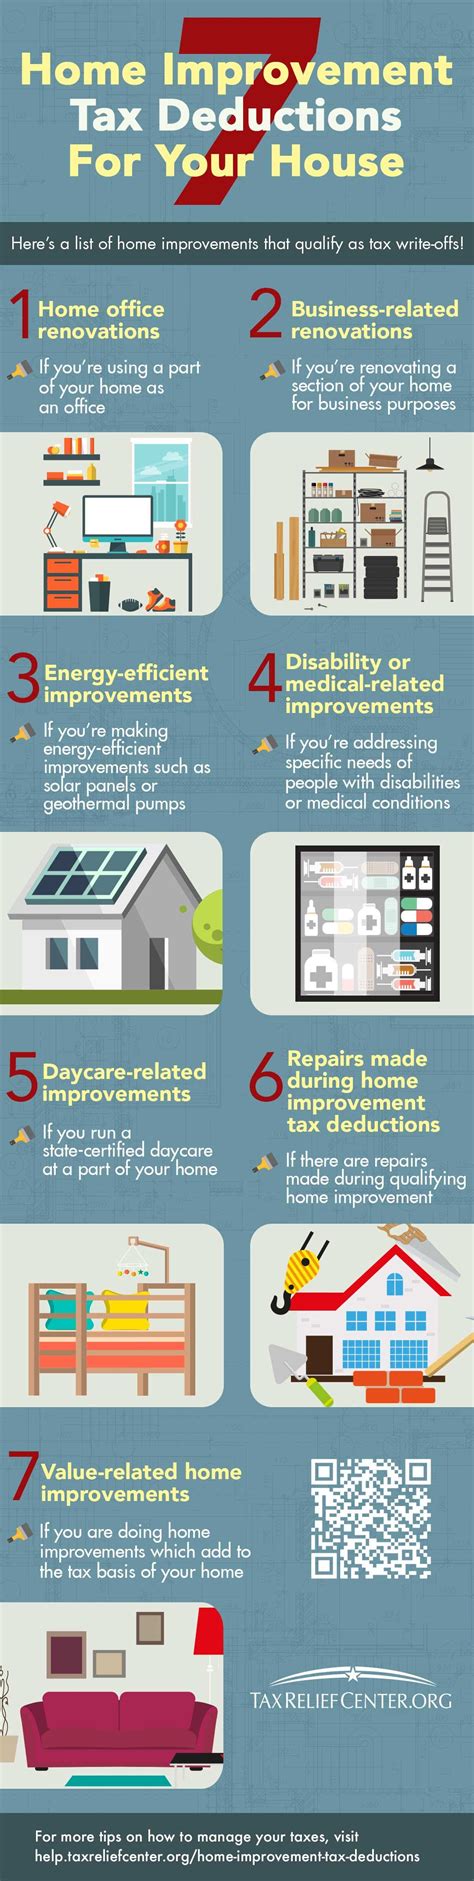 7 Home Improvement Tax Deductions INFOGRAPHIC Tax Deductions